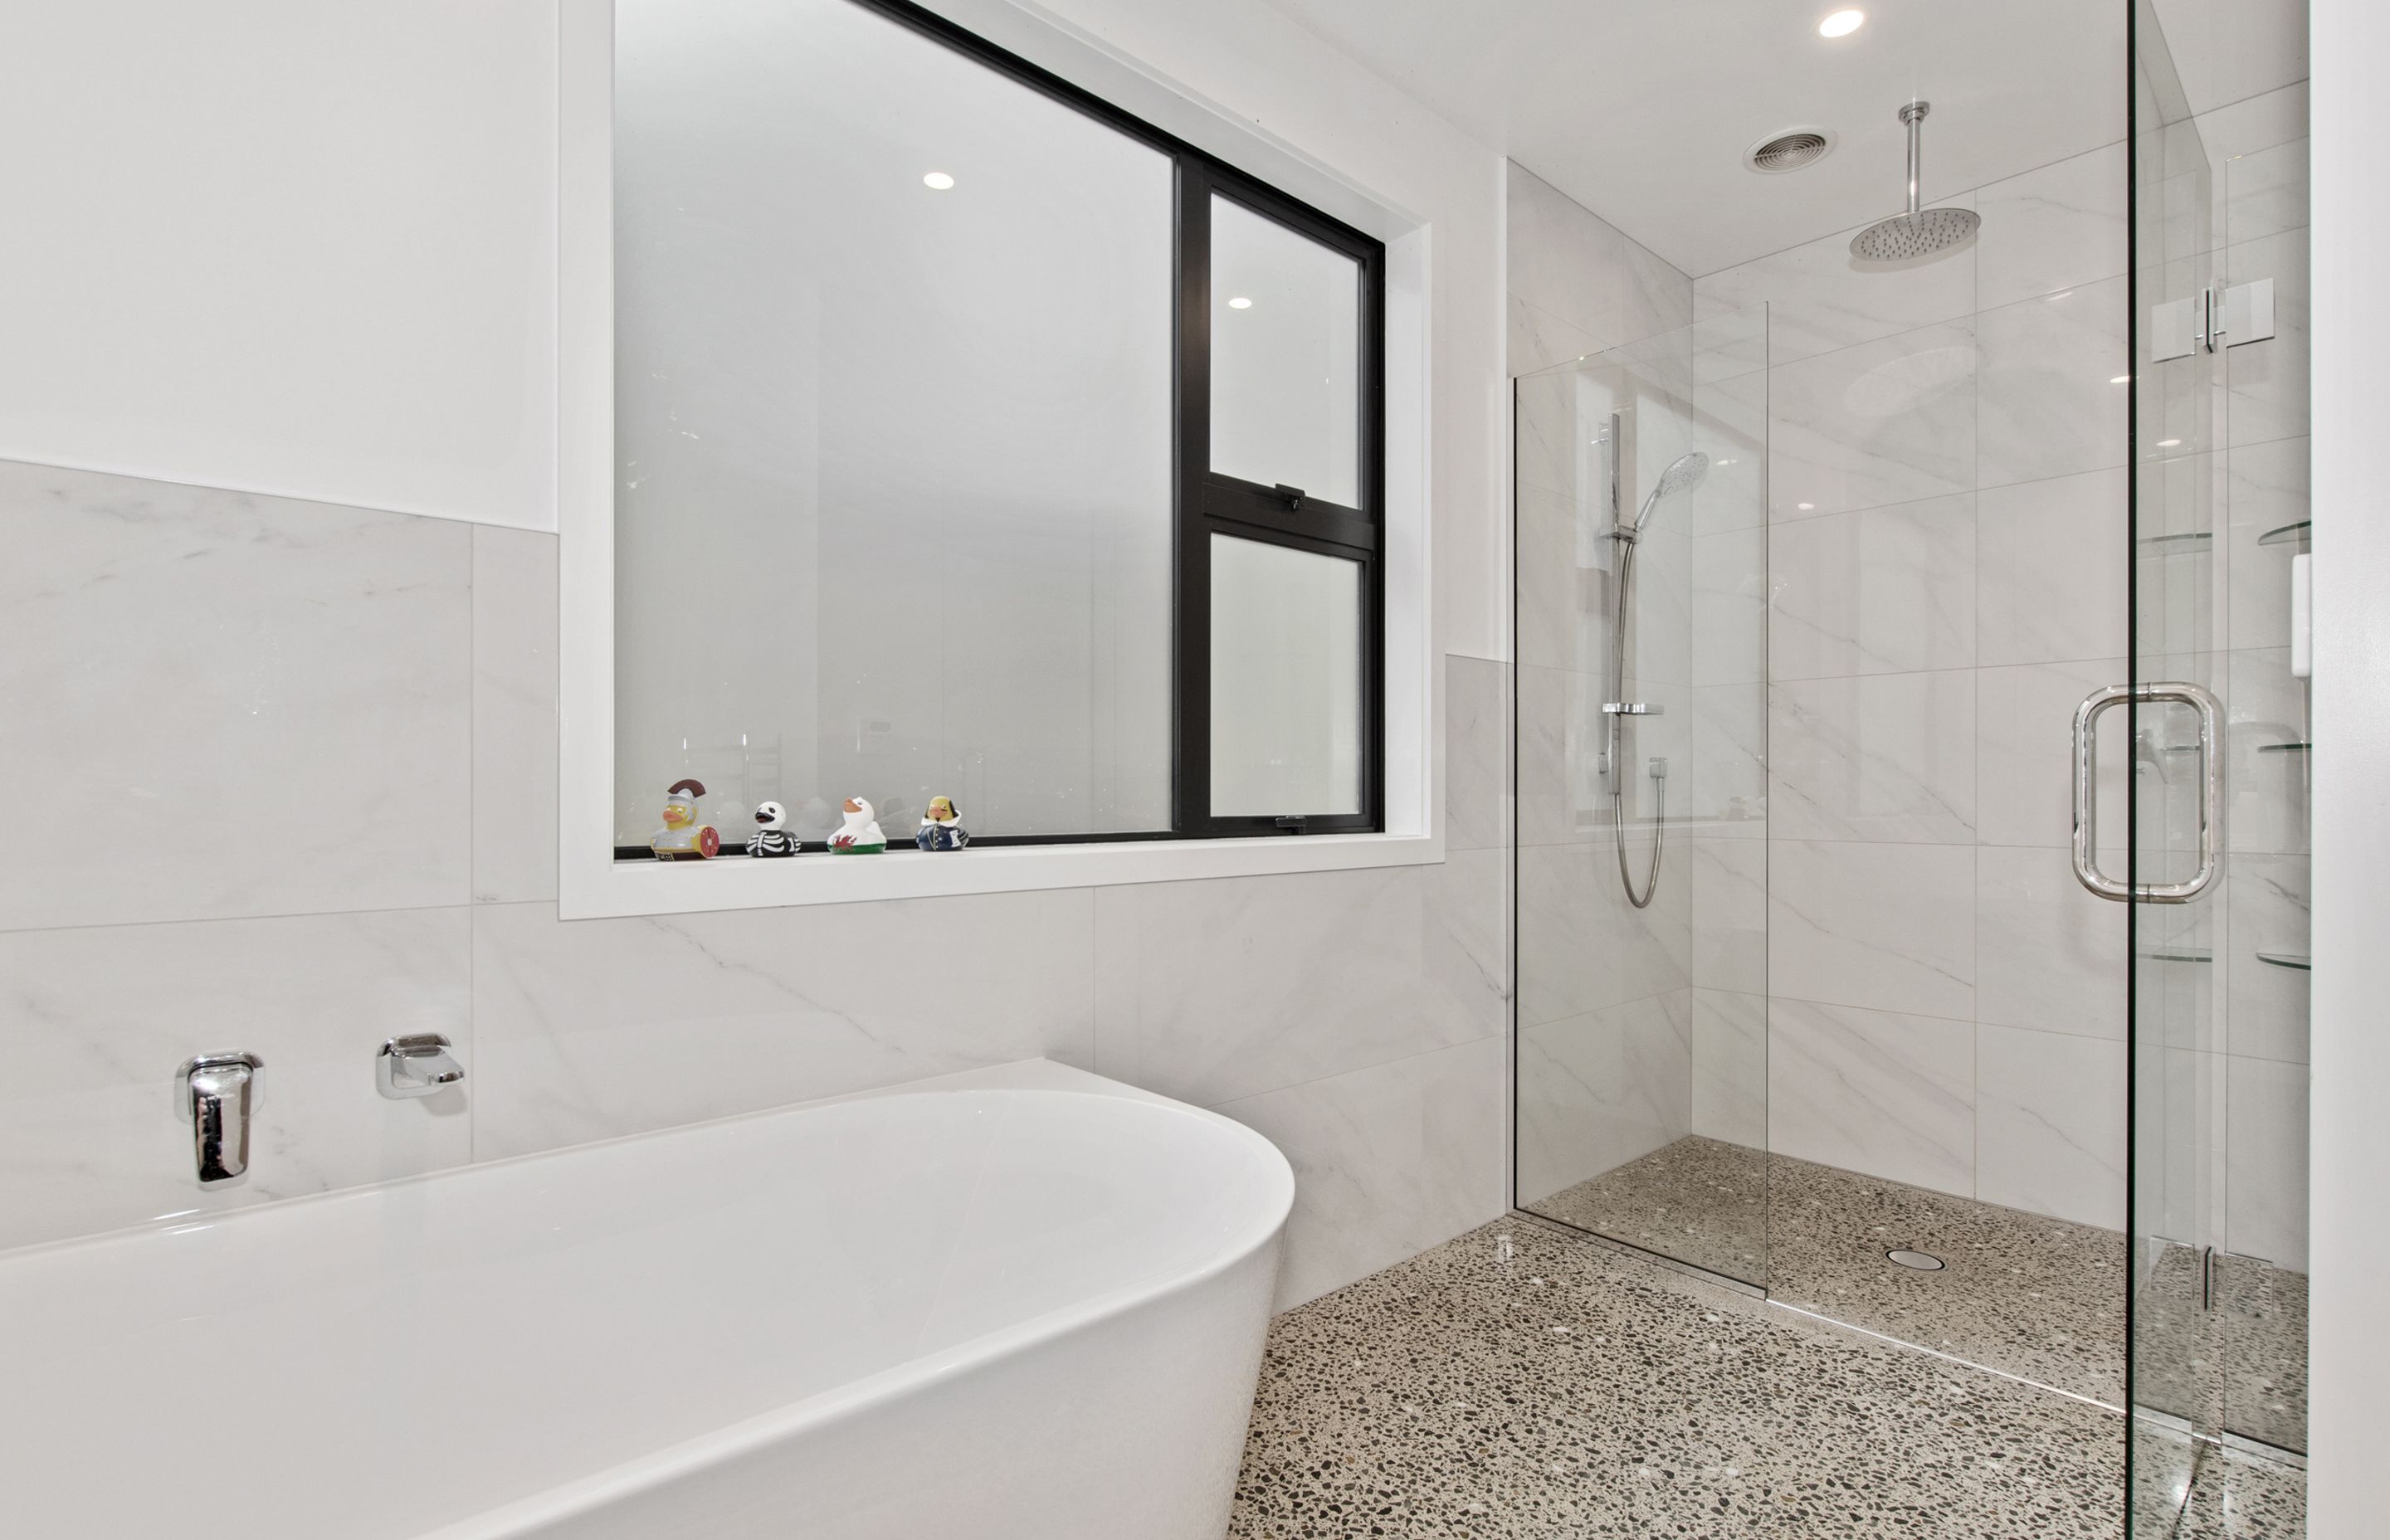 Family bathroom with polished concrete floor leading into tiled shower